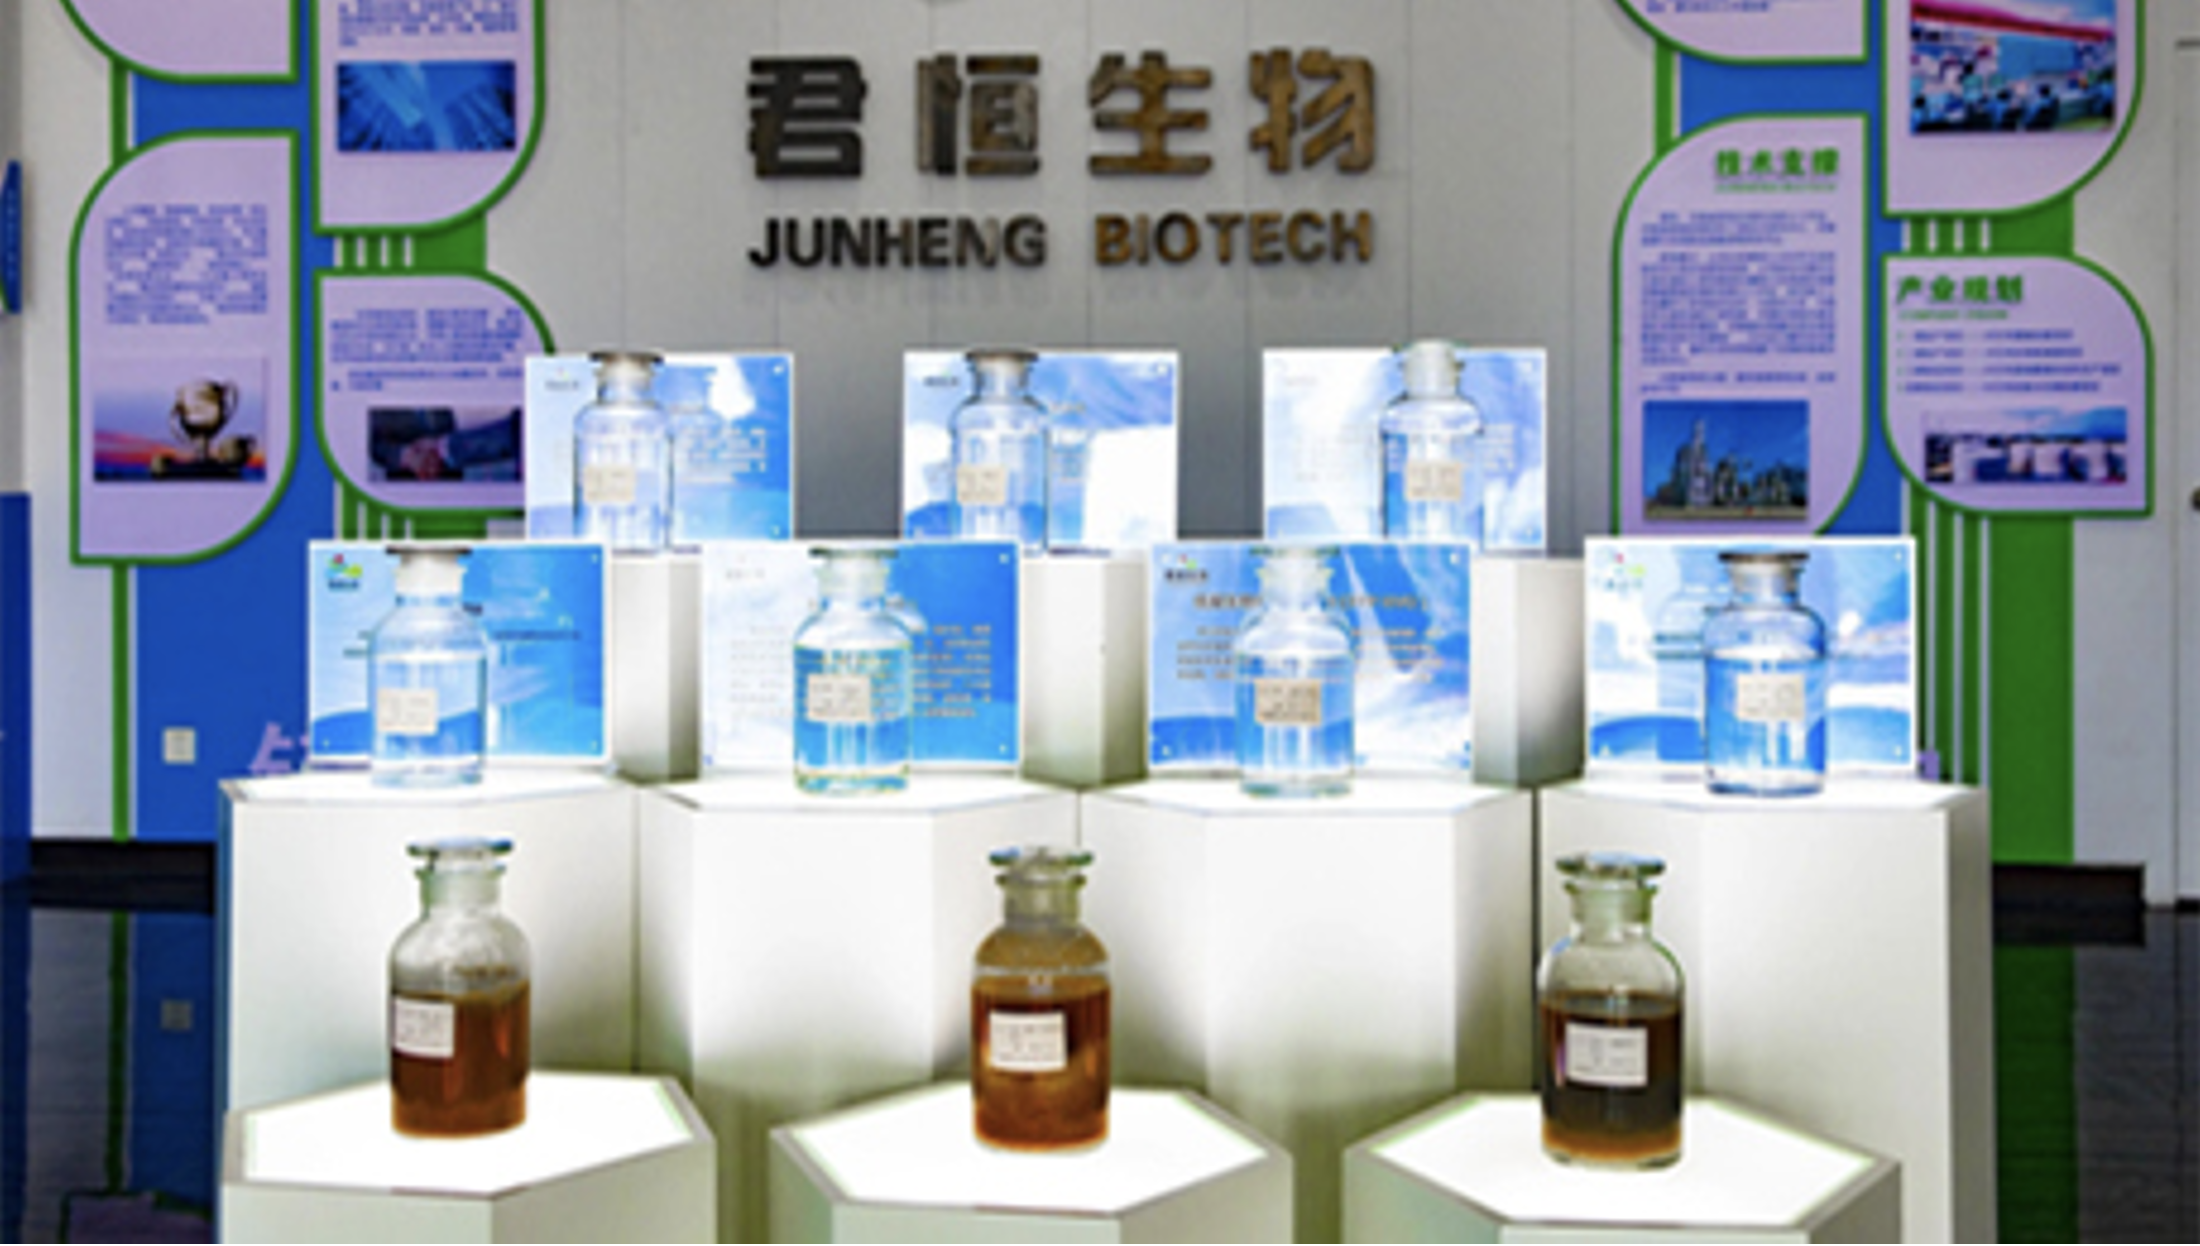 Junheng Biotech obtains certificate for jet fuel oil made from waste oils and rift oil